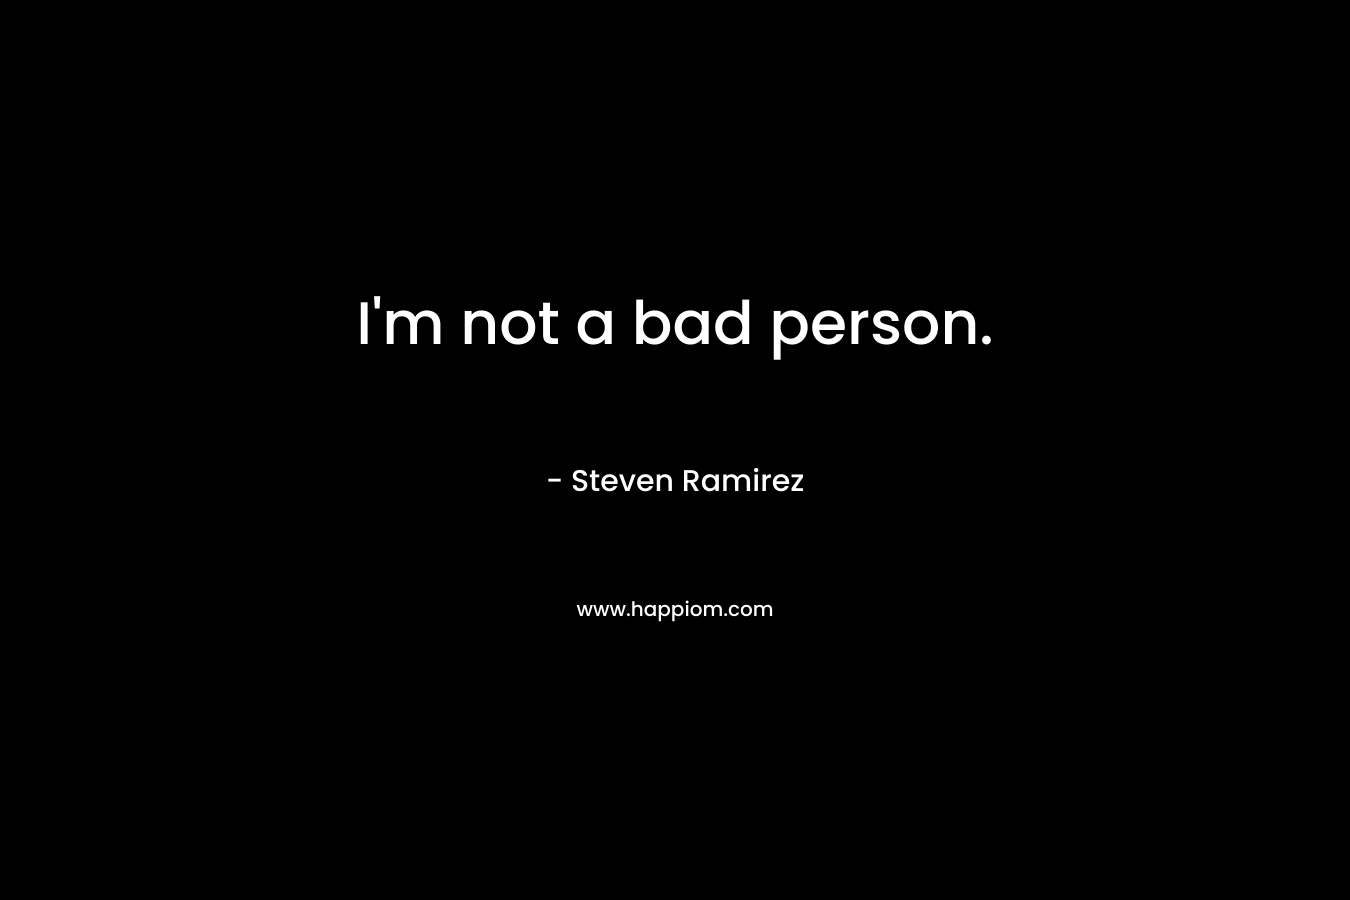 I'm not a bad person.